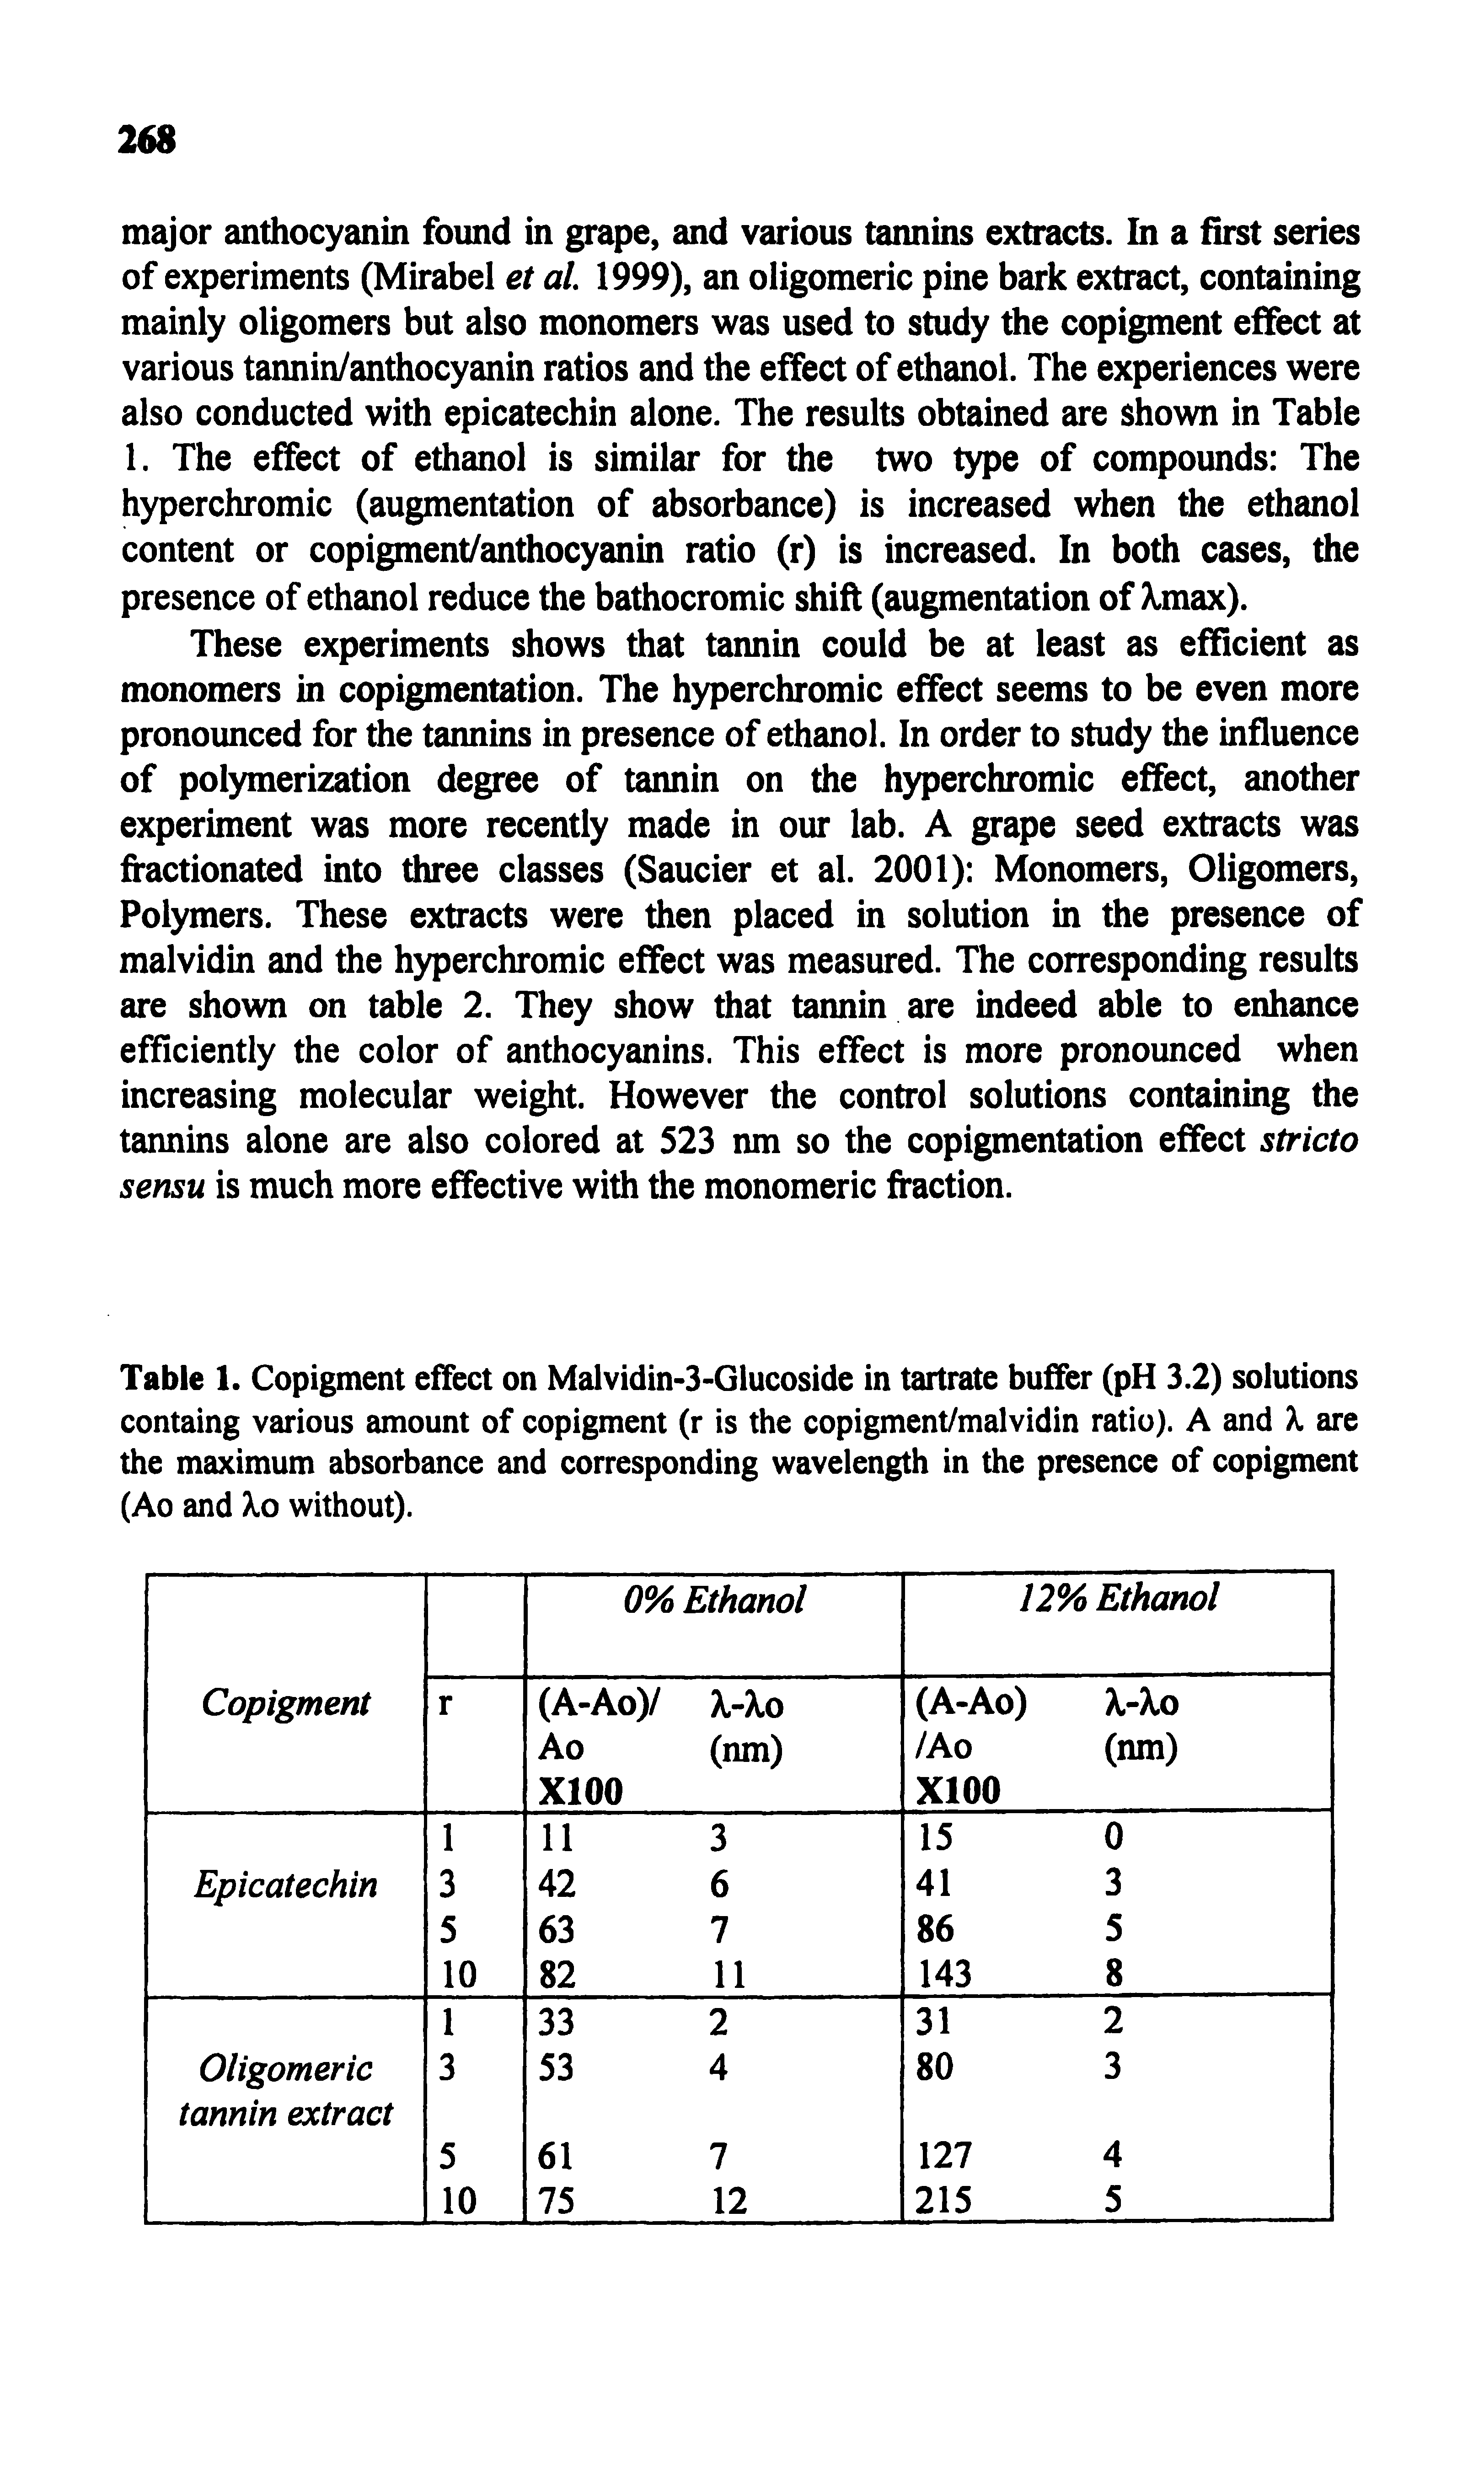 Table 1. Copigment effect on Malvidin-3-Glucoside in tartrate buffer (pH 3.2) solutions containg various amount of copigment (r is the copigment/malvidin ratio). A and X are the maximum absorbance and corresponding wavelength in the presence of copigment (Ao and Xo without).